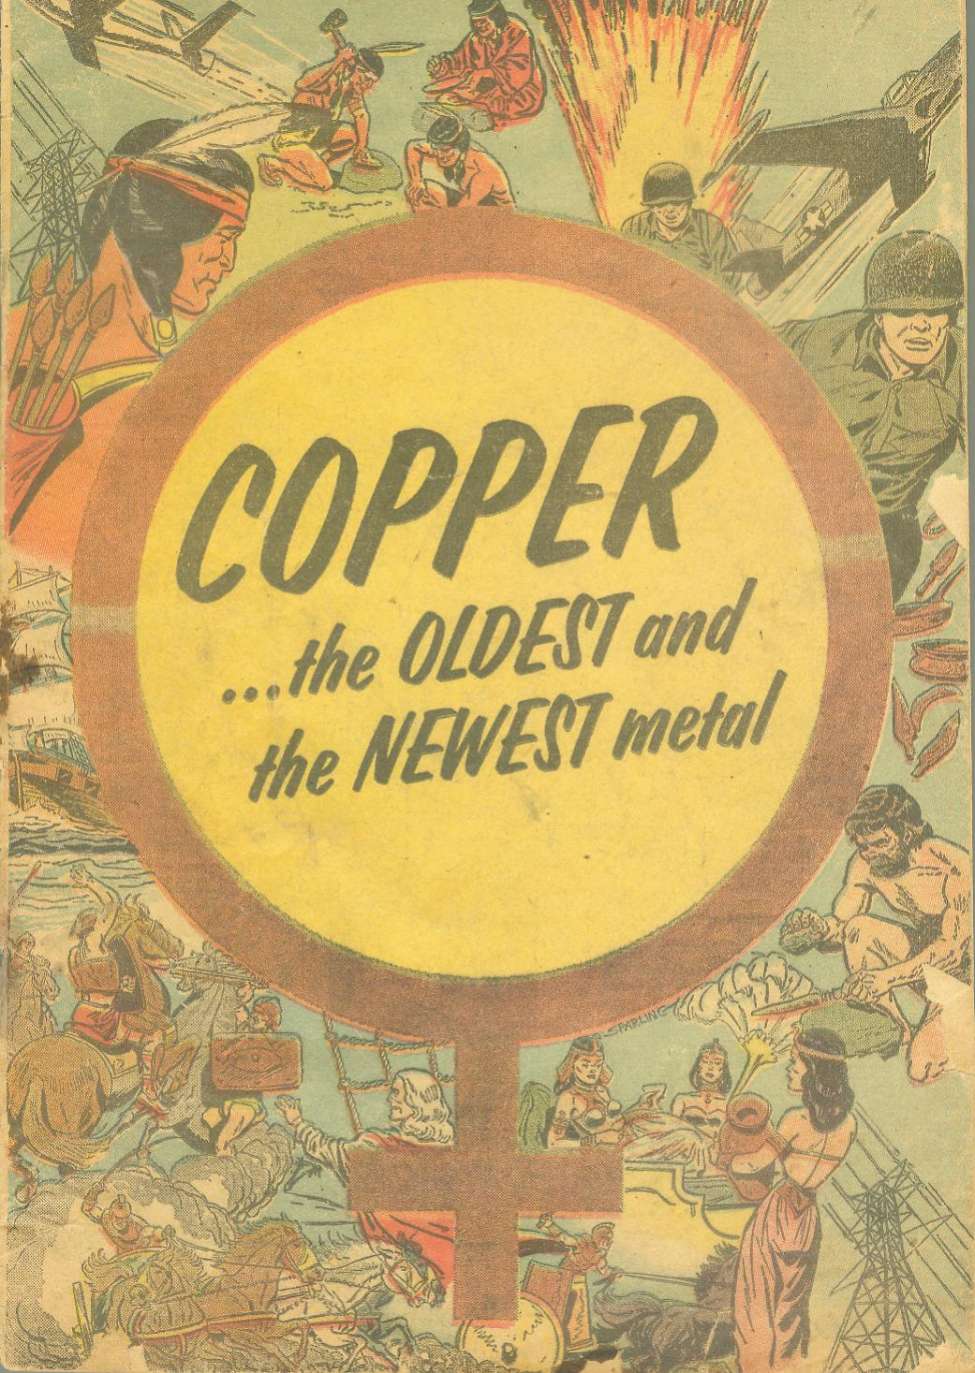 Book Cover For Copper...the Oldest and the Newest Metal